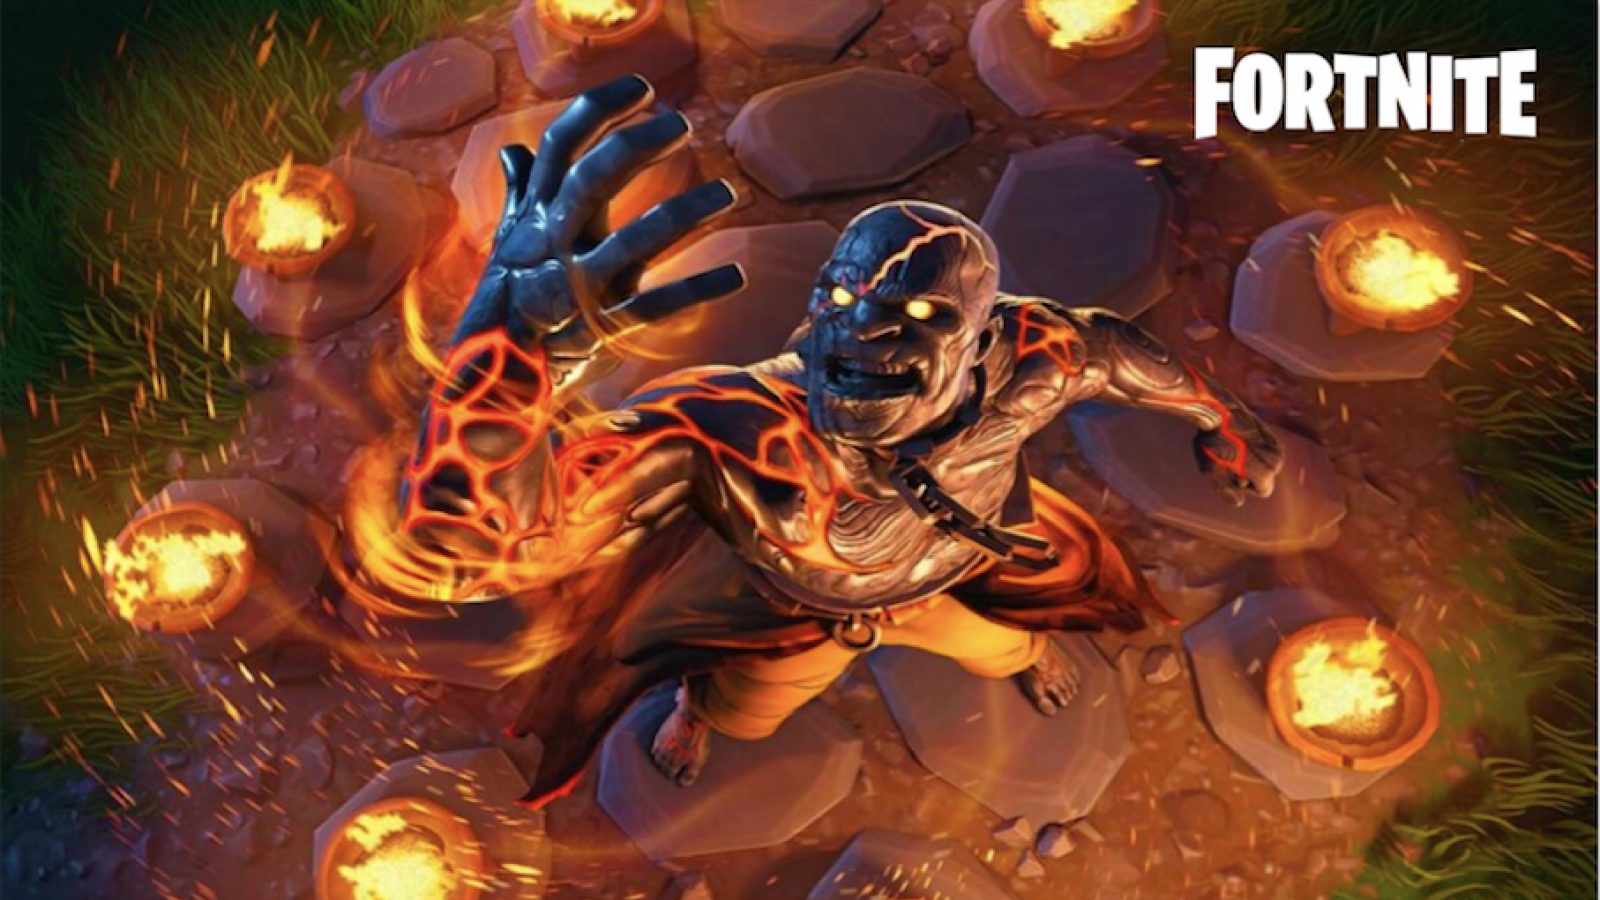 Here's what Fortnite's Season 8 trailer could look like - Dexerto